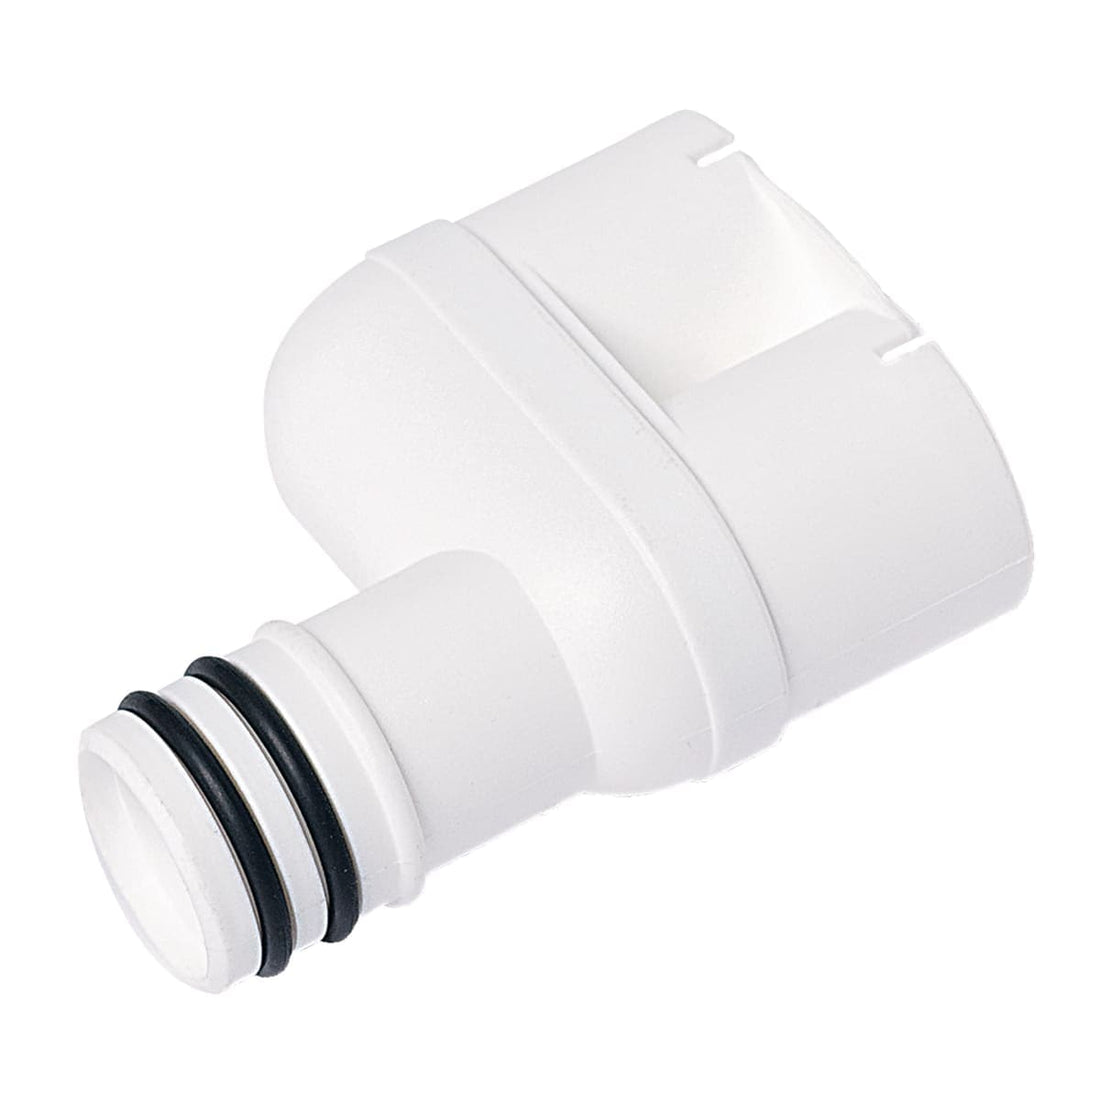 3-WAY SIDE FITTING DIA MM 17-20 FOR AIR CONDITIONING CONDENSATE DRAINAGE - best price from Maltashopper.com BR430005922